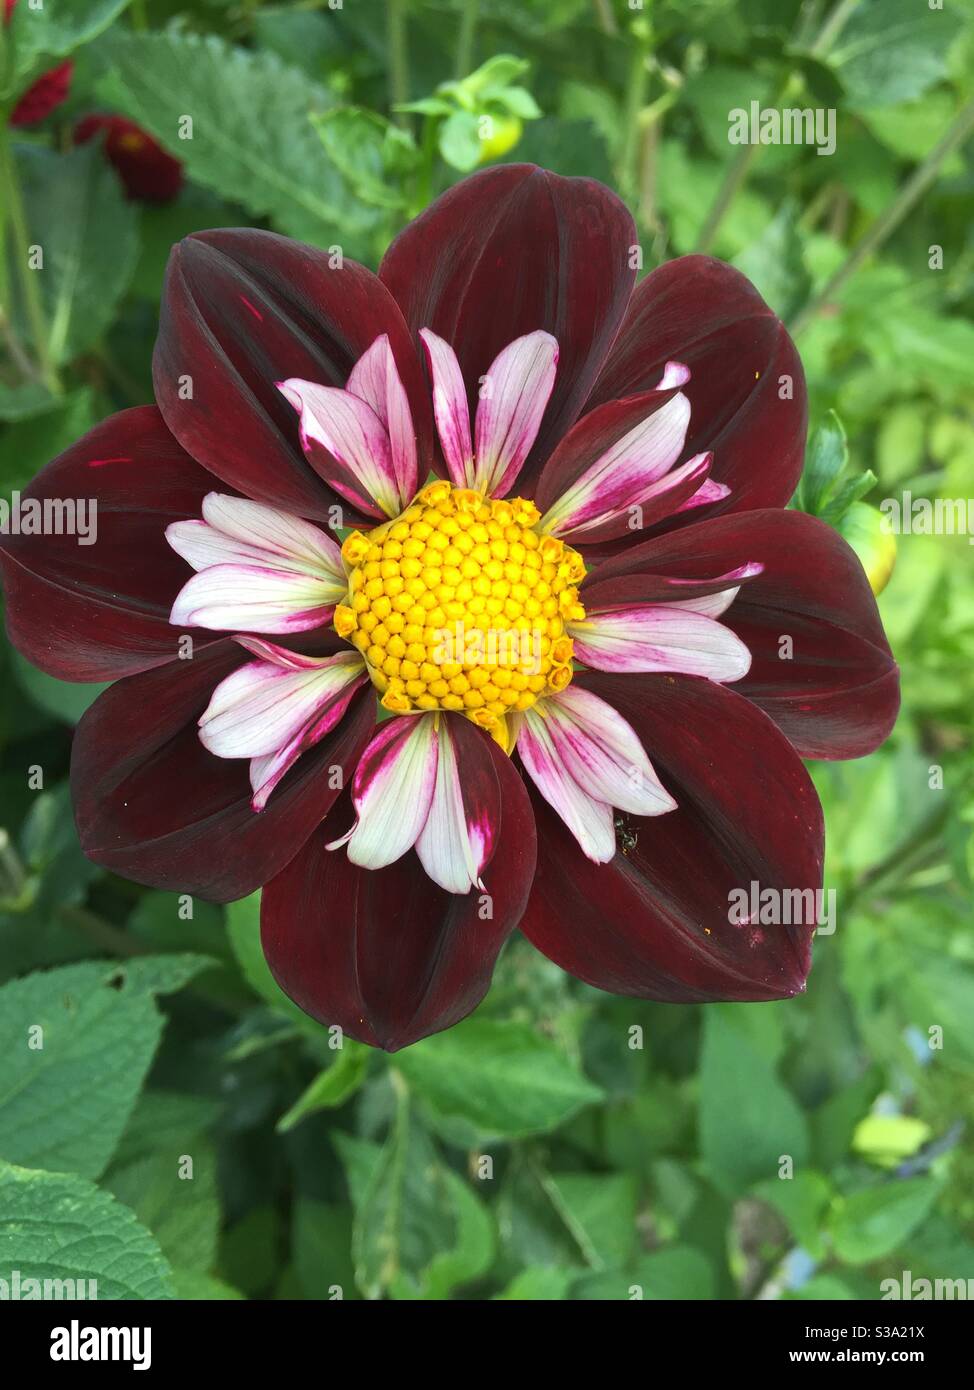 Collerette dahlia ‘Stephanie Hertel’ with dark velvet purple outer ring with creamy pink inner ring and yellow central disc with green foliage background. Halskrausendahlie Stock Photo